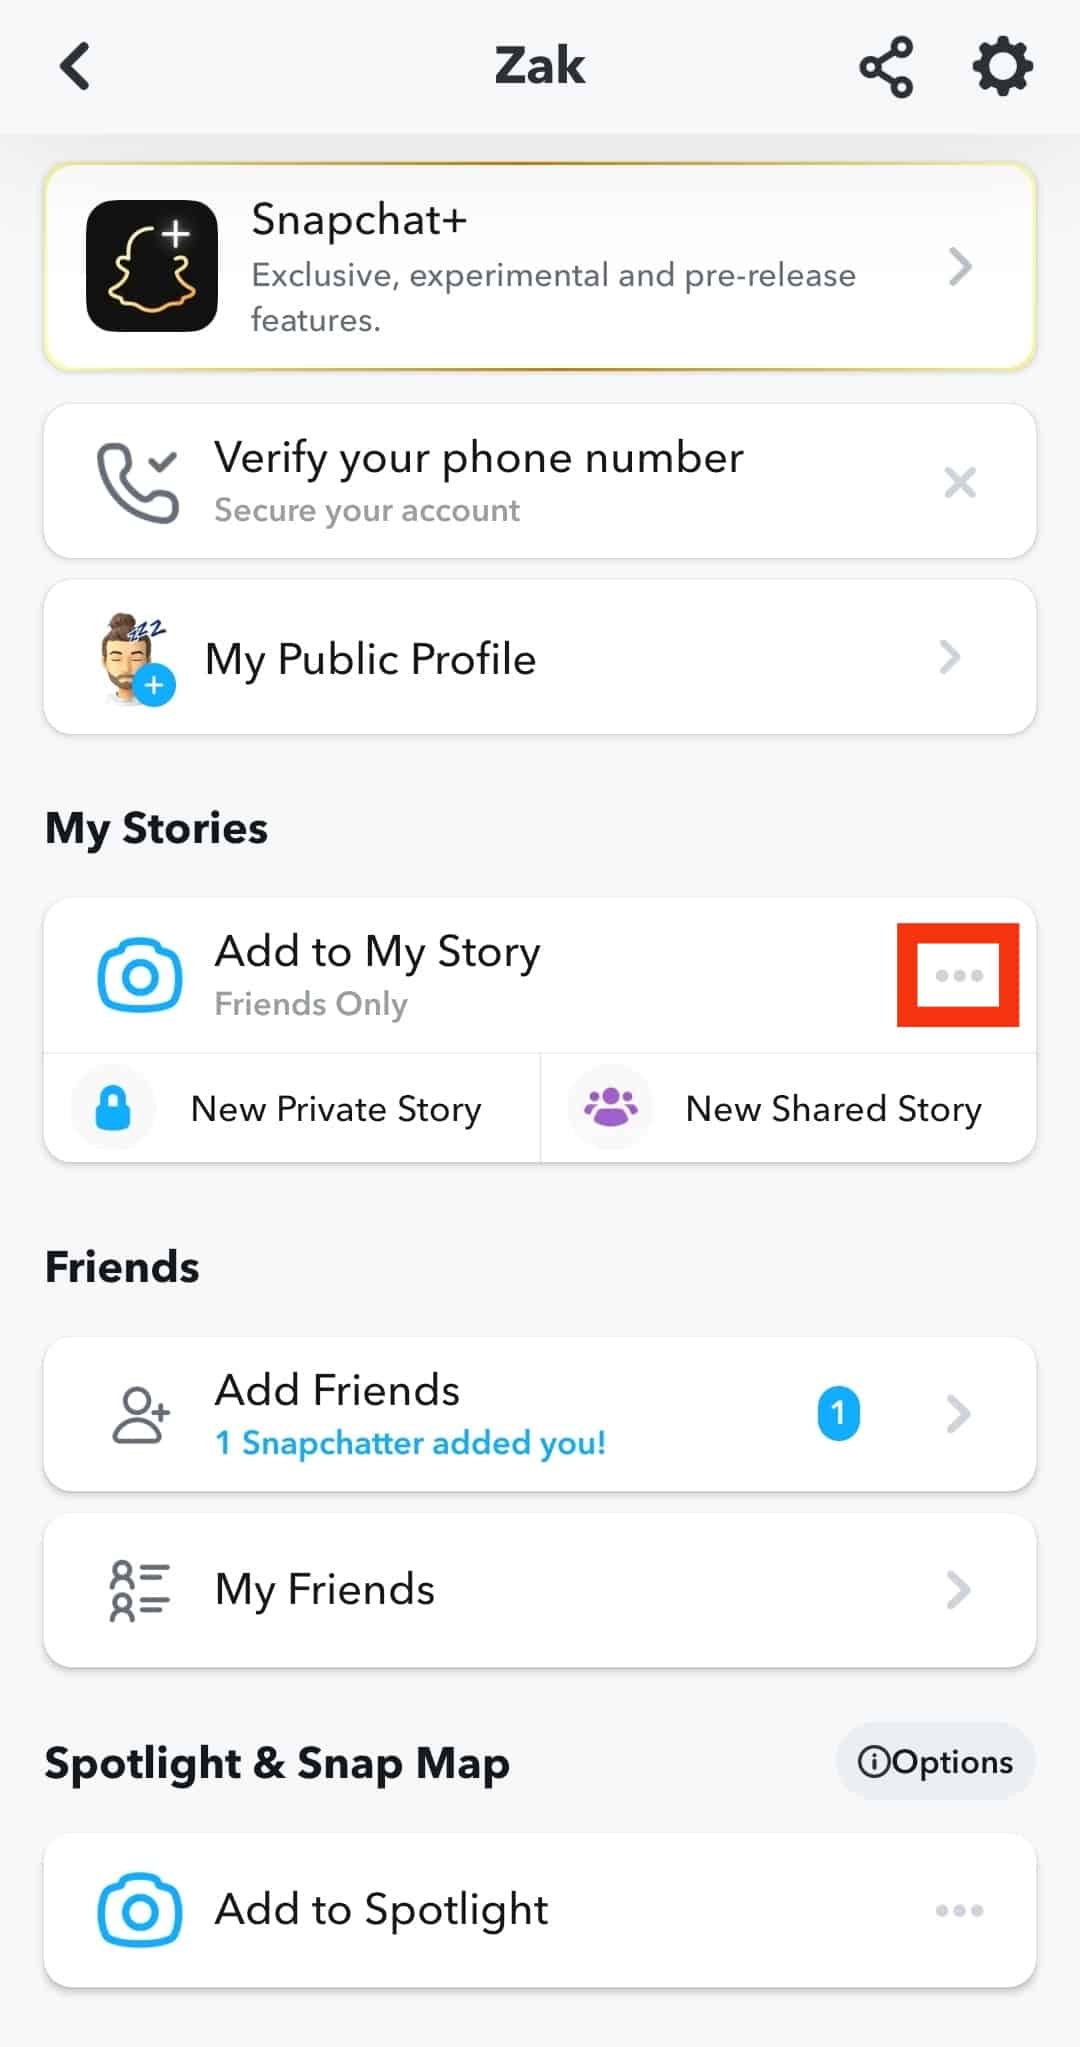 Tap On The Three-Dot Button Next To The Add To My Story Button.